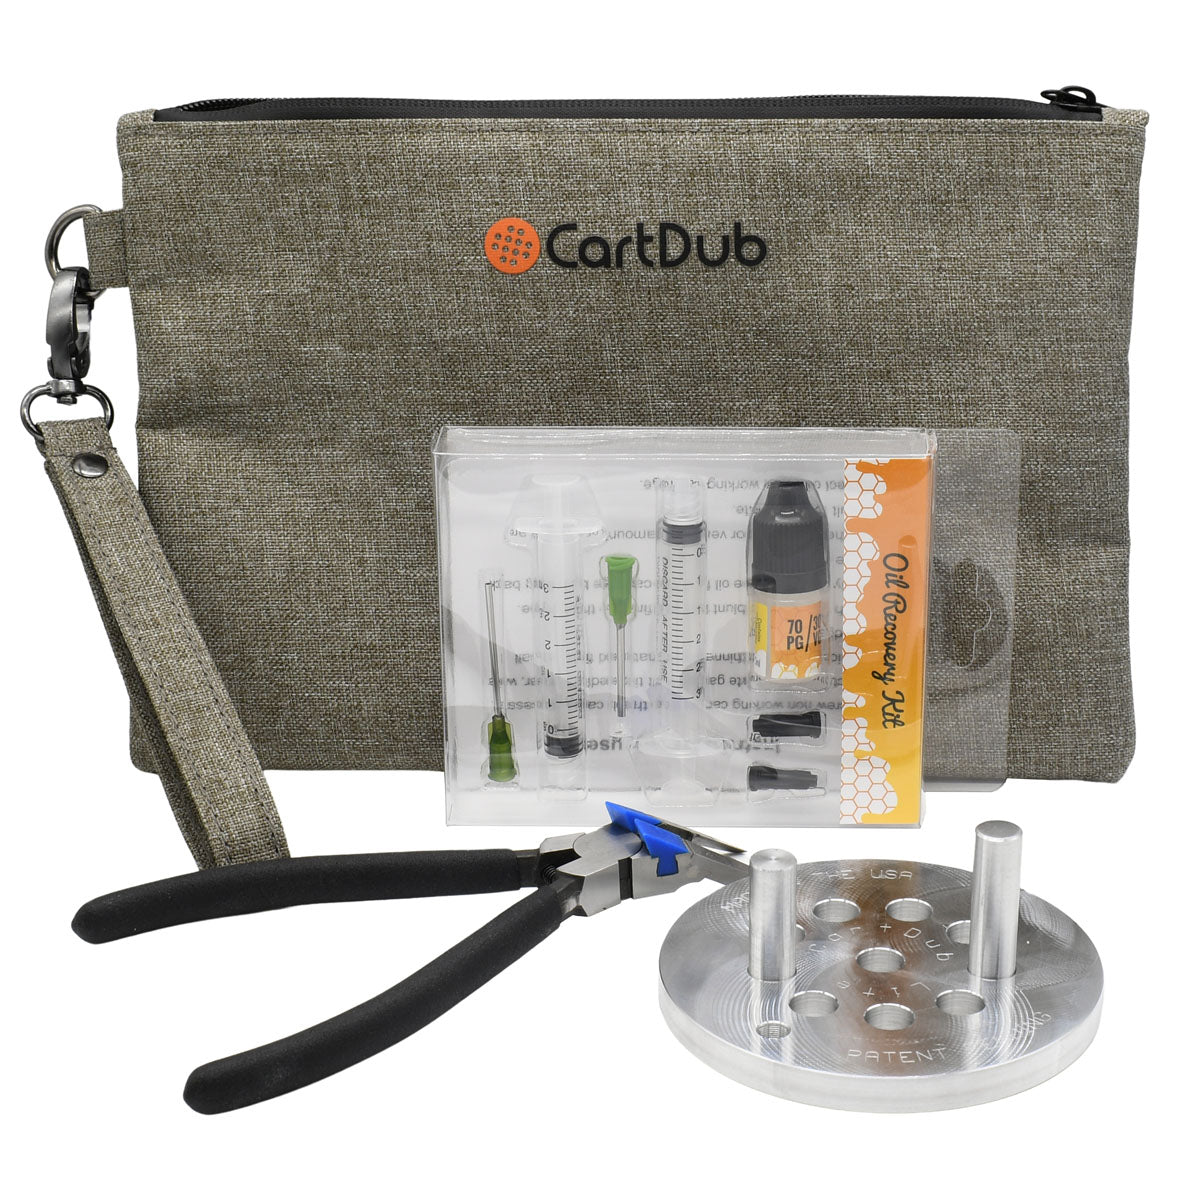 CartDub Kit to open and remove oil from carts with Smell Proof Carrying Bag